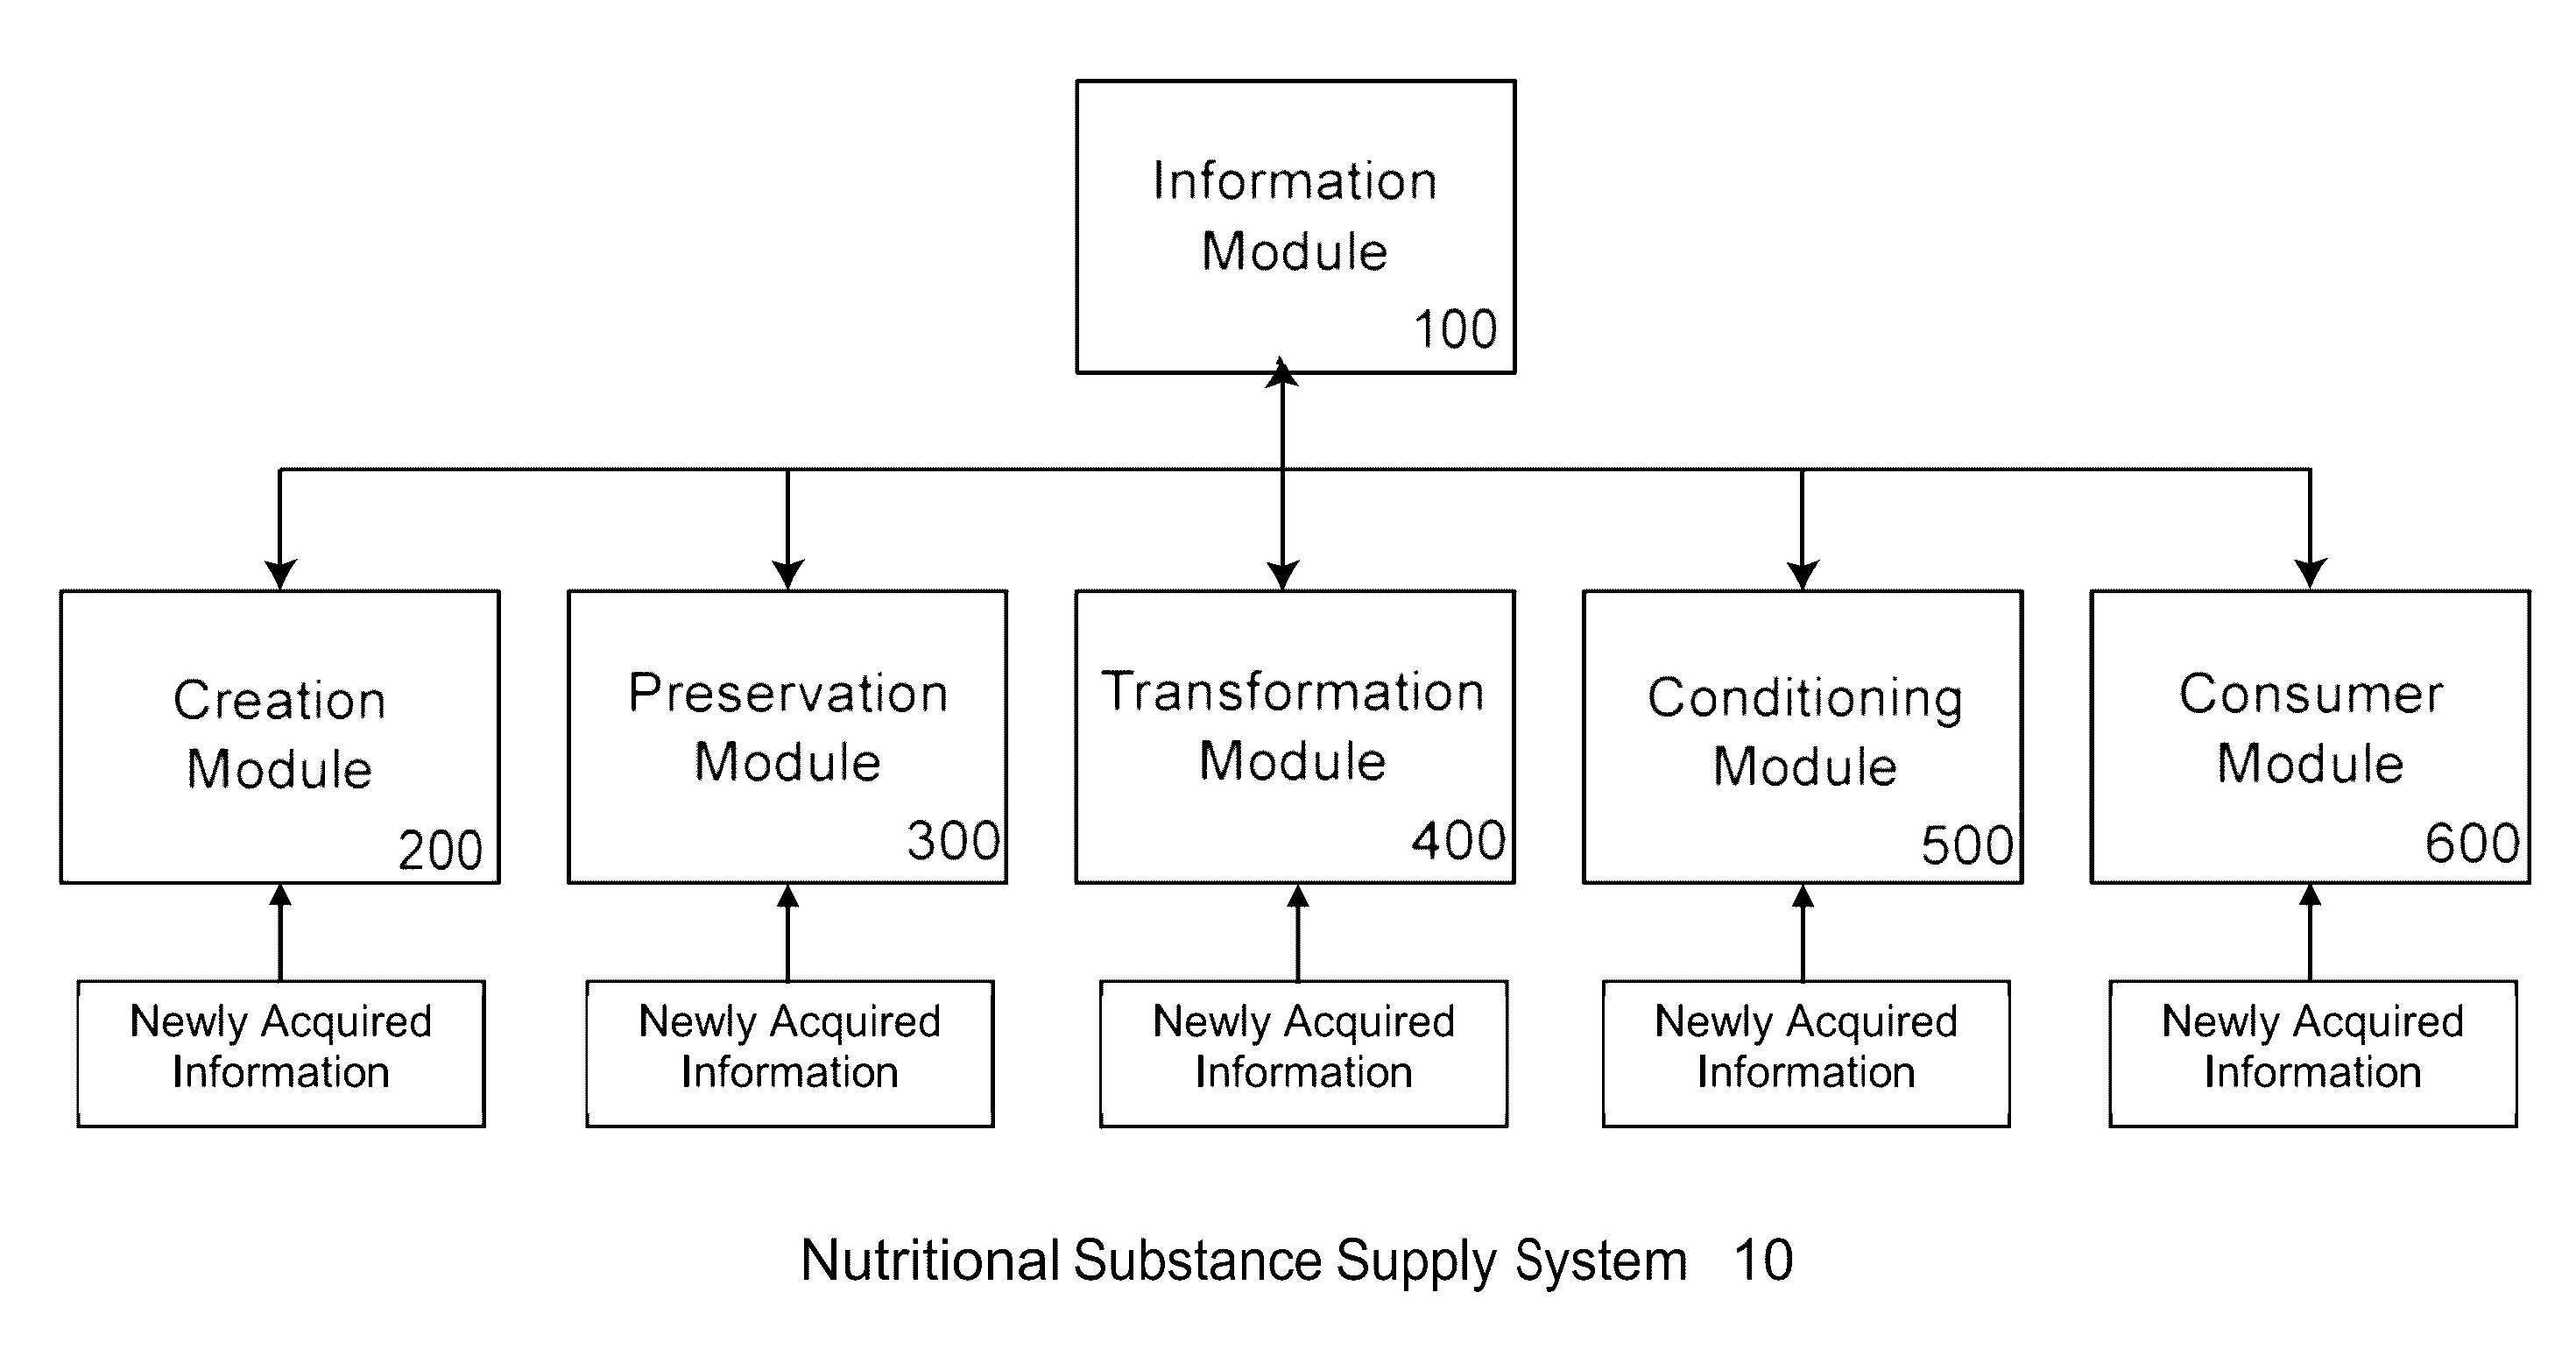 Conditioner with weight sensors for nutritional substances